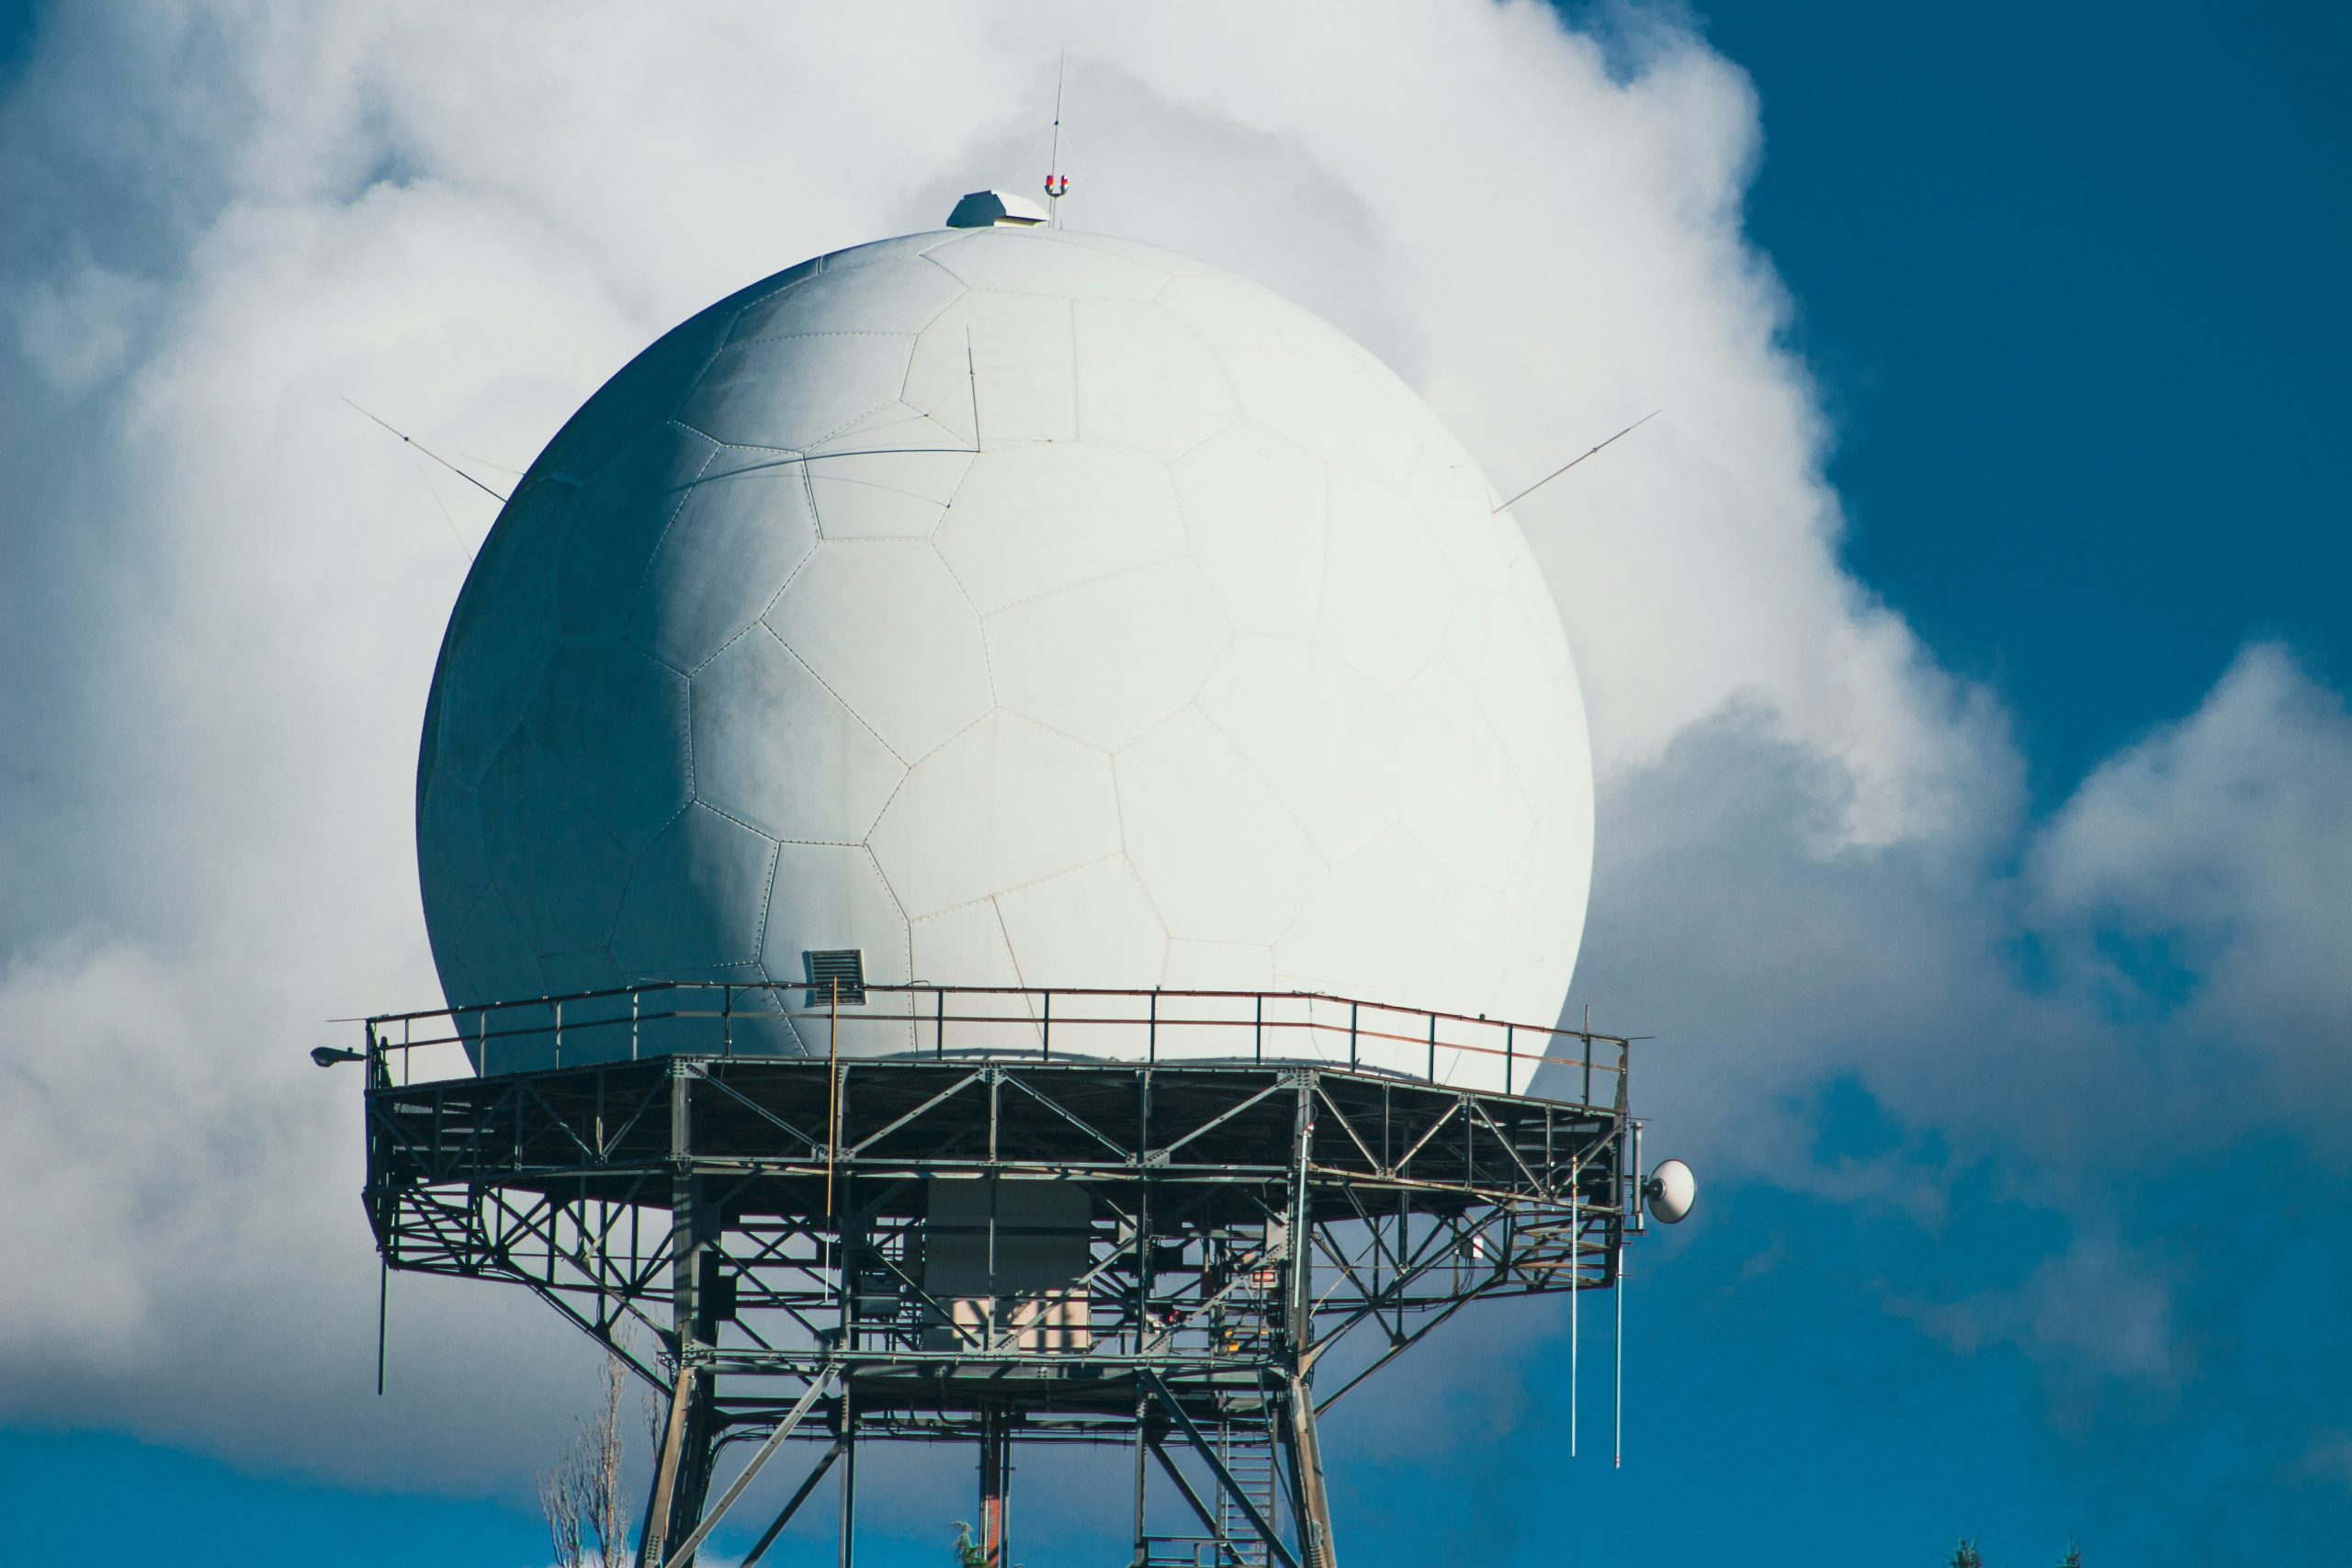 A radar dome on scaffolding against a blue sky with clouds.